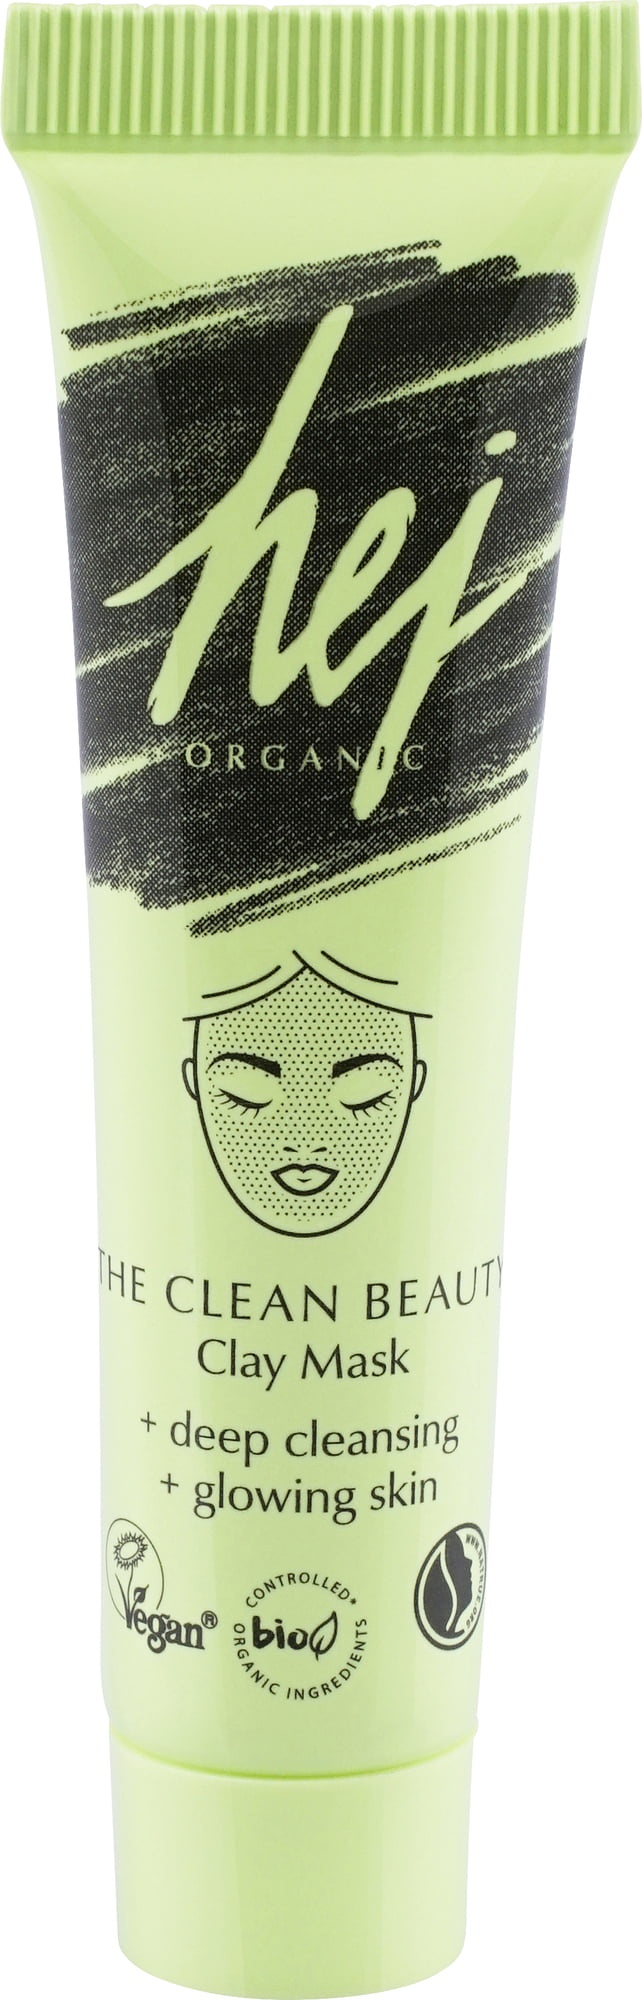 Hej organic The Clean Beauty Clay Mask